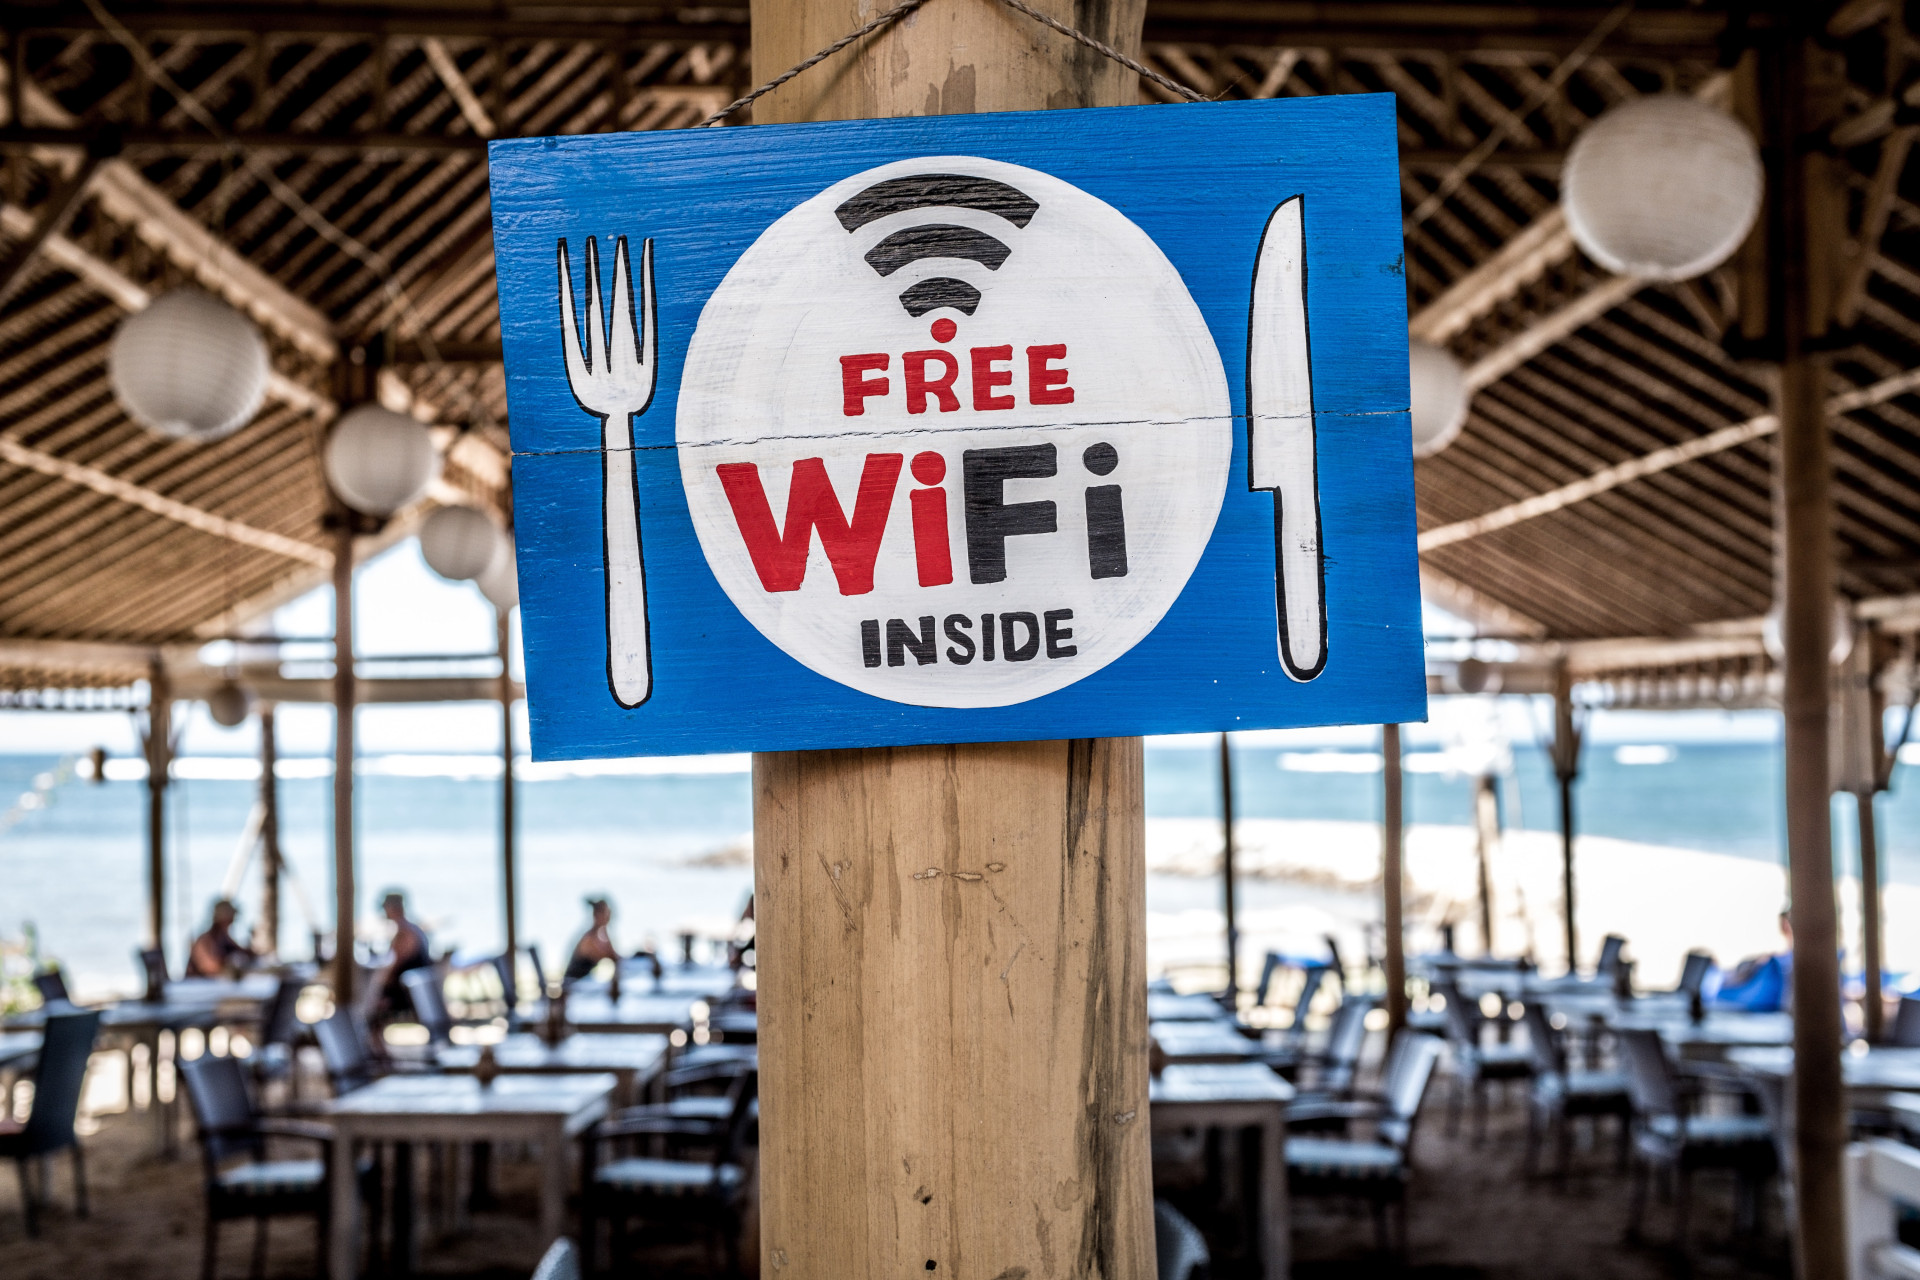 A "free Wi-Fi inside" sign at a restaurant.